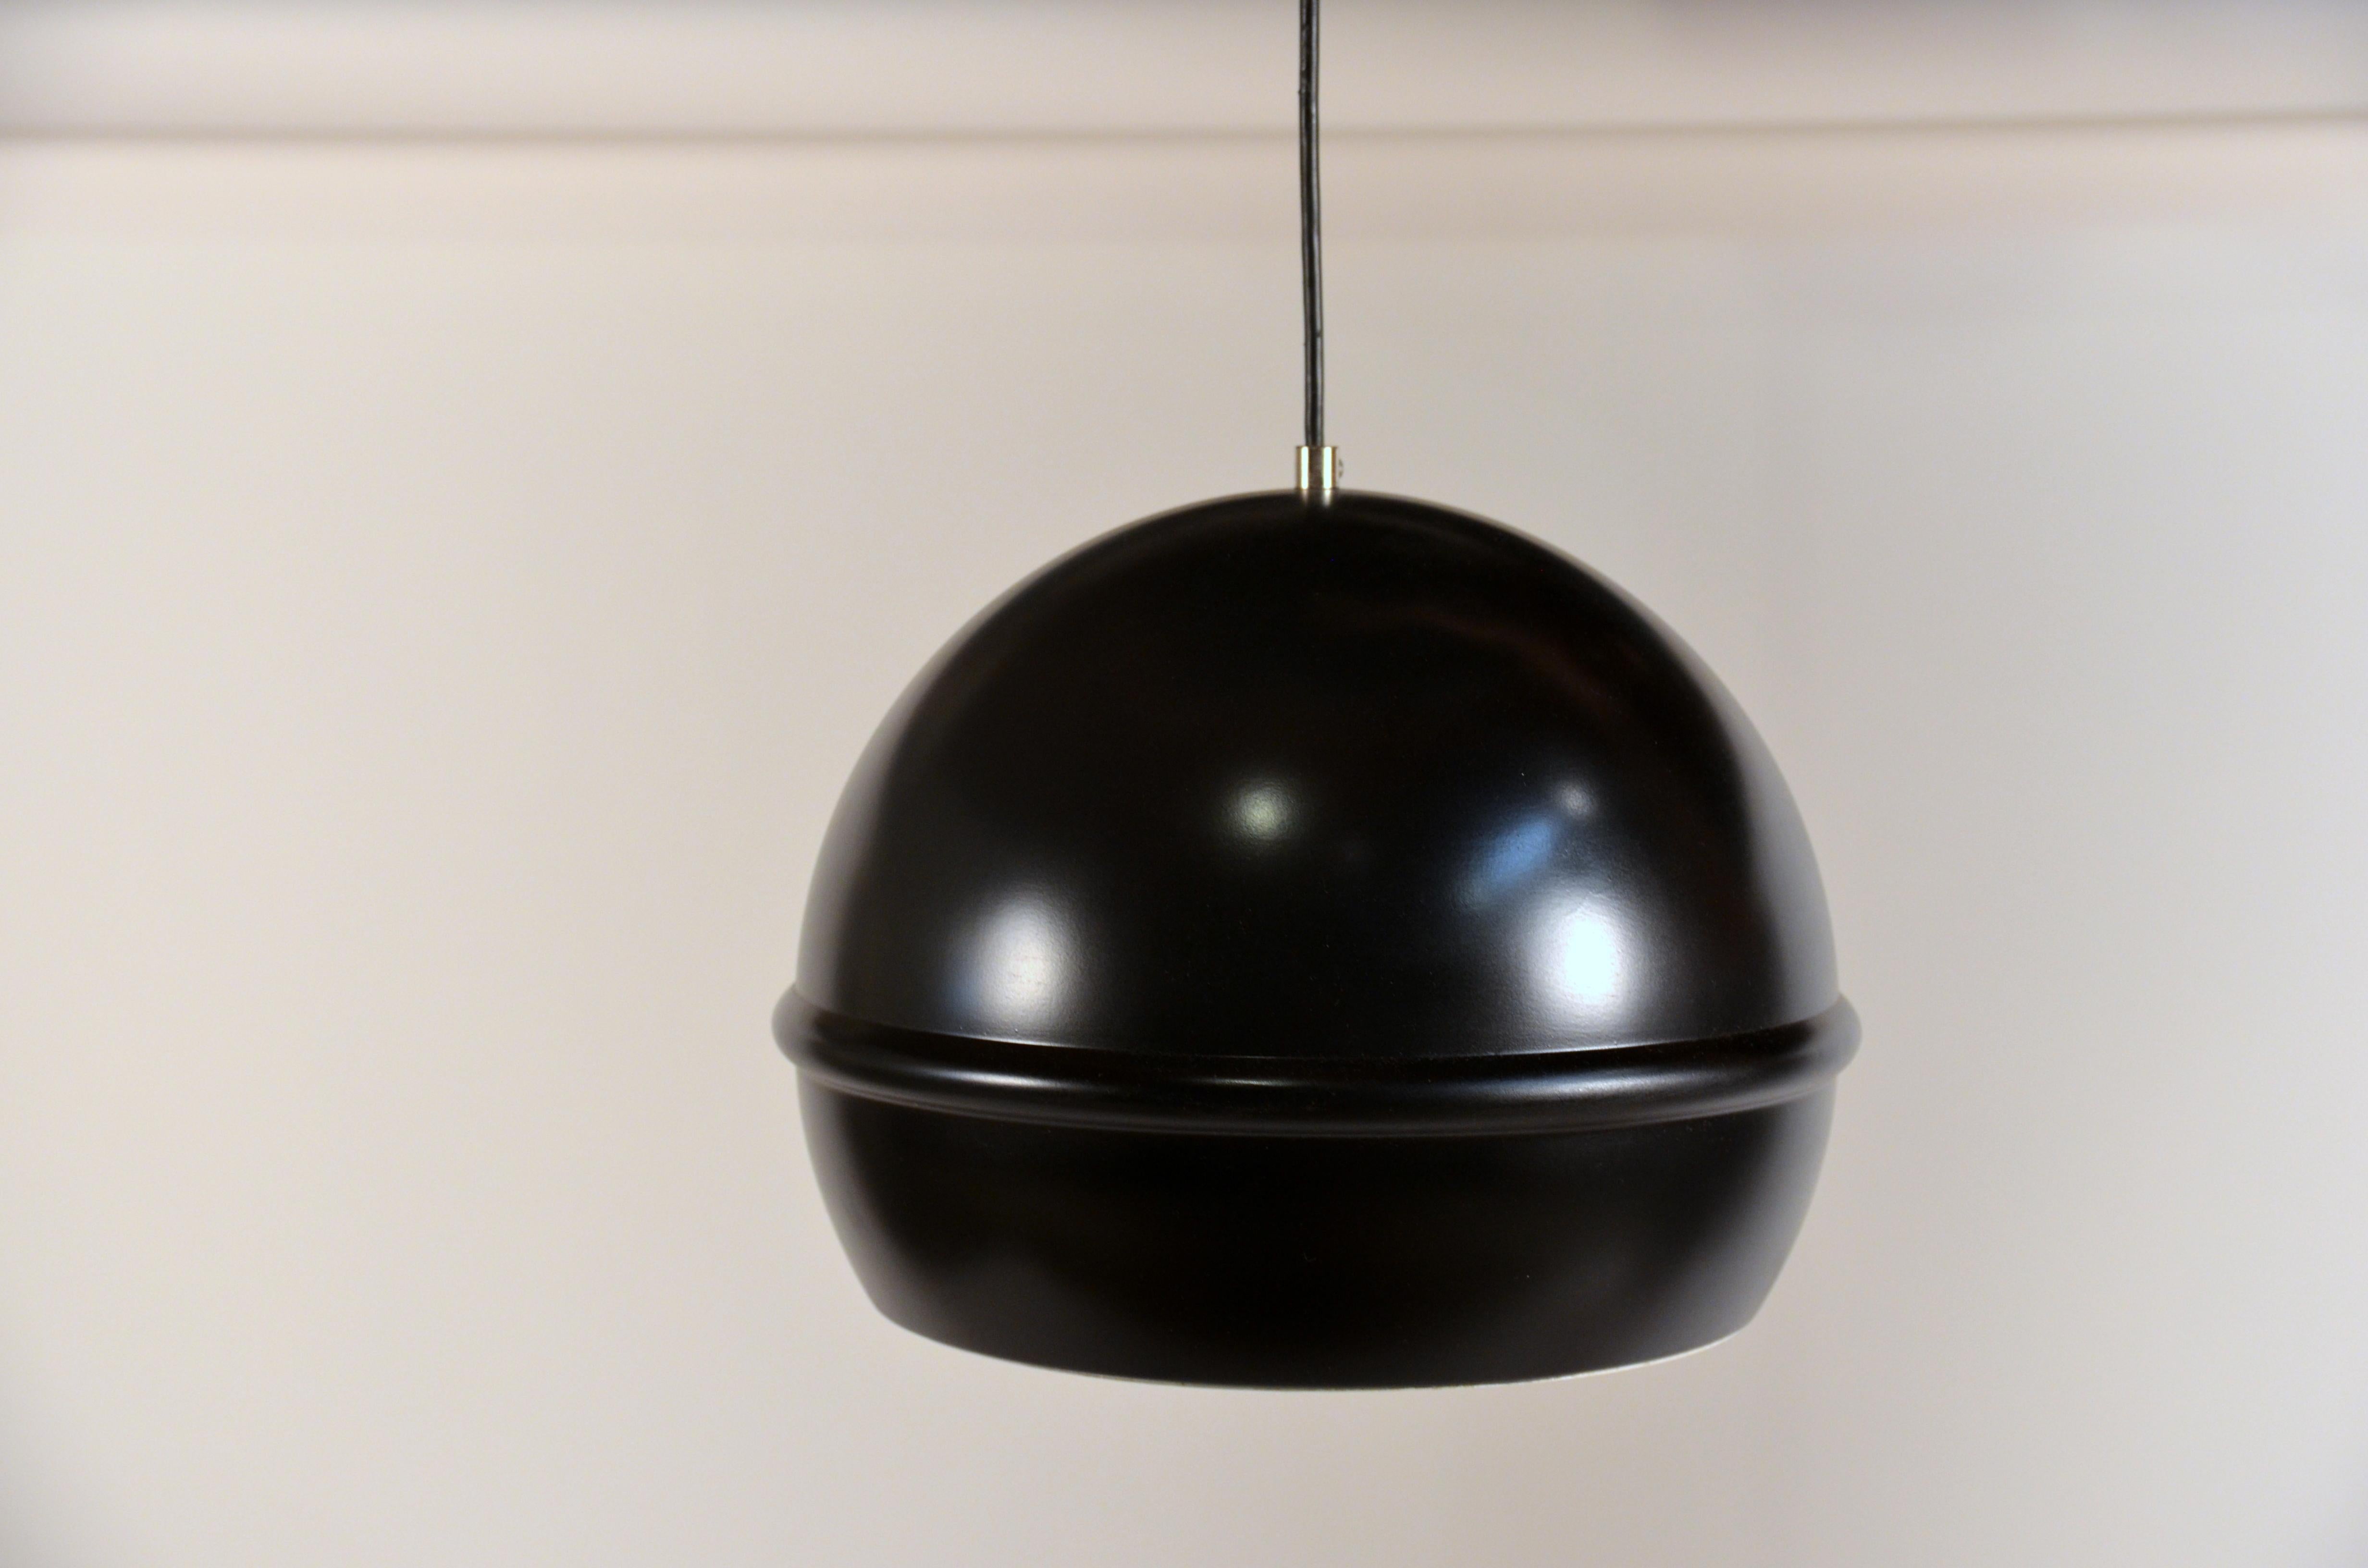 Set of 7 French 1960s black globe pendants. Matching canopies.

Can be installed aligned, in a grid, or in a cluster at different heights.

Perfect with silver- or gold-tipped bulbs.

Priced as a set of 8 but can also be sold individually; please